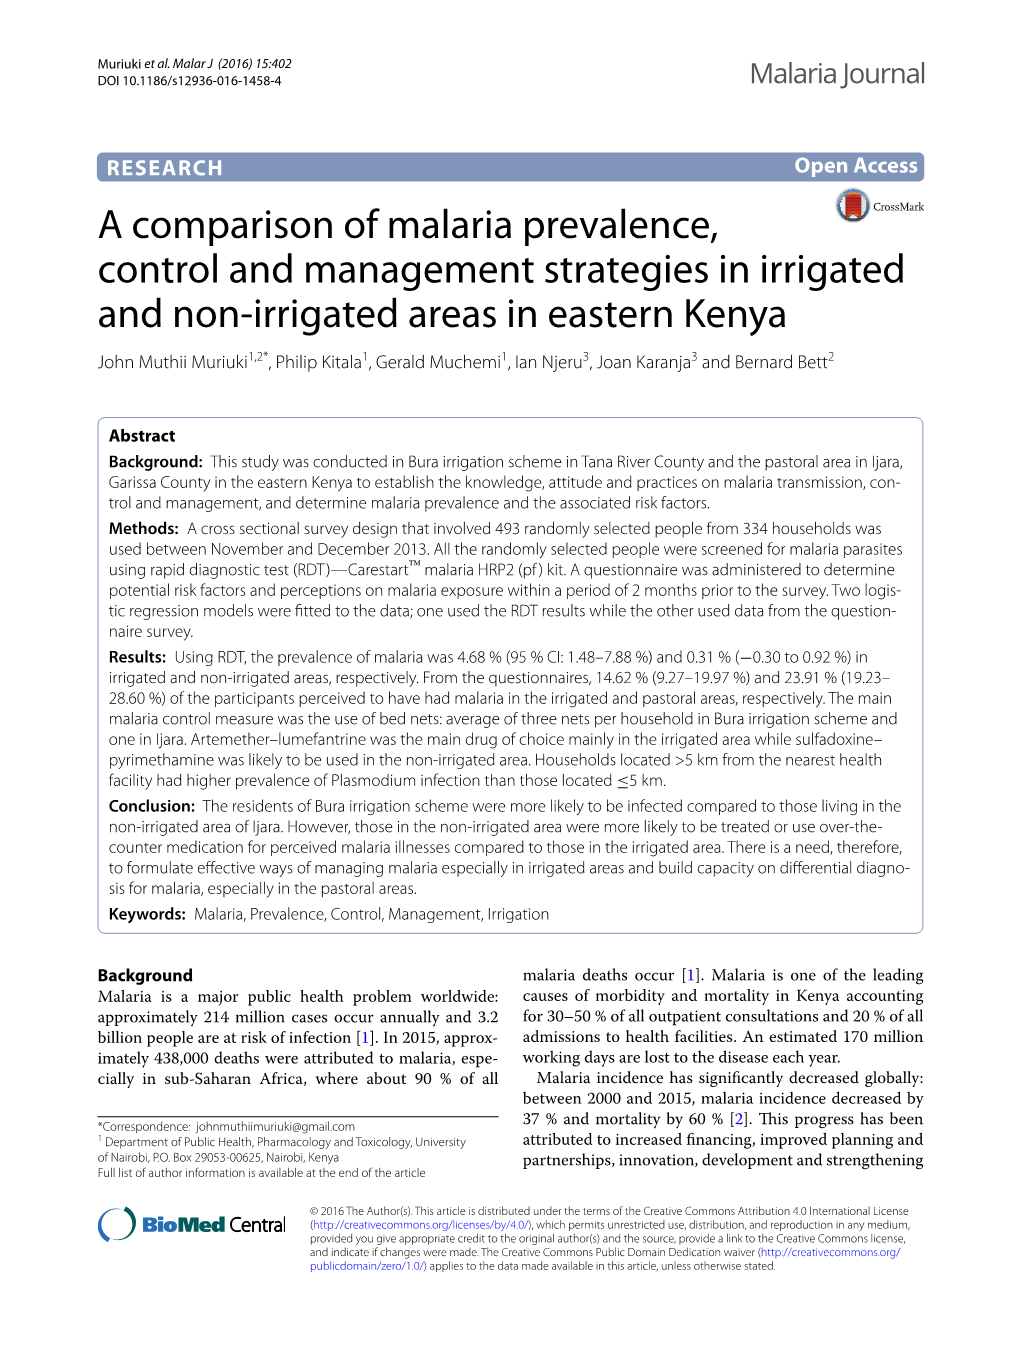 A Comparison of Malaria Prevalence, Control and Management Strategies